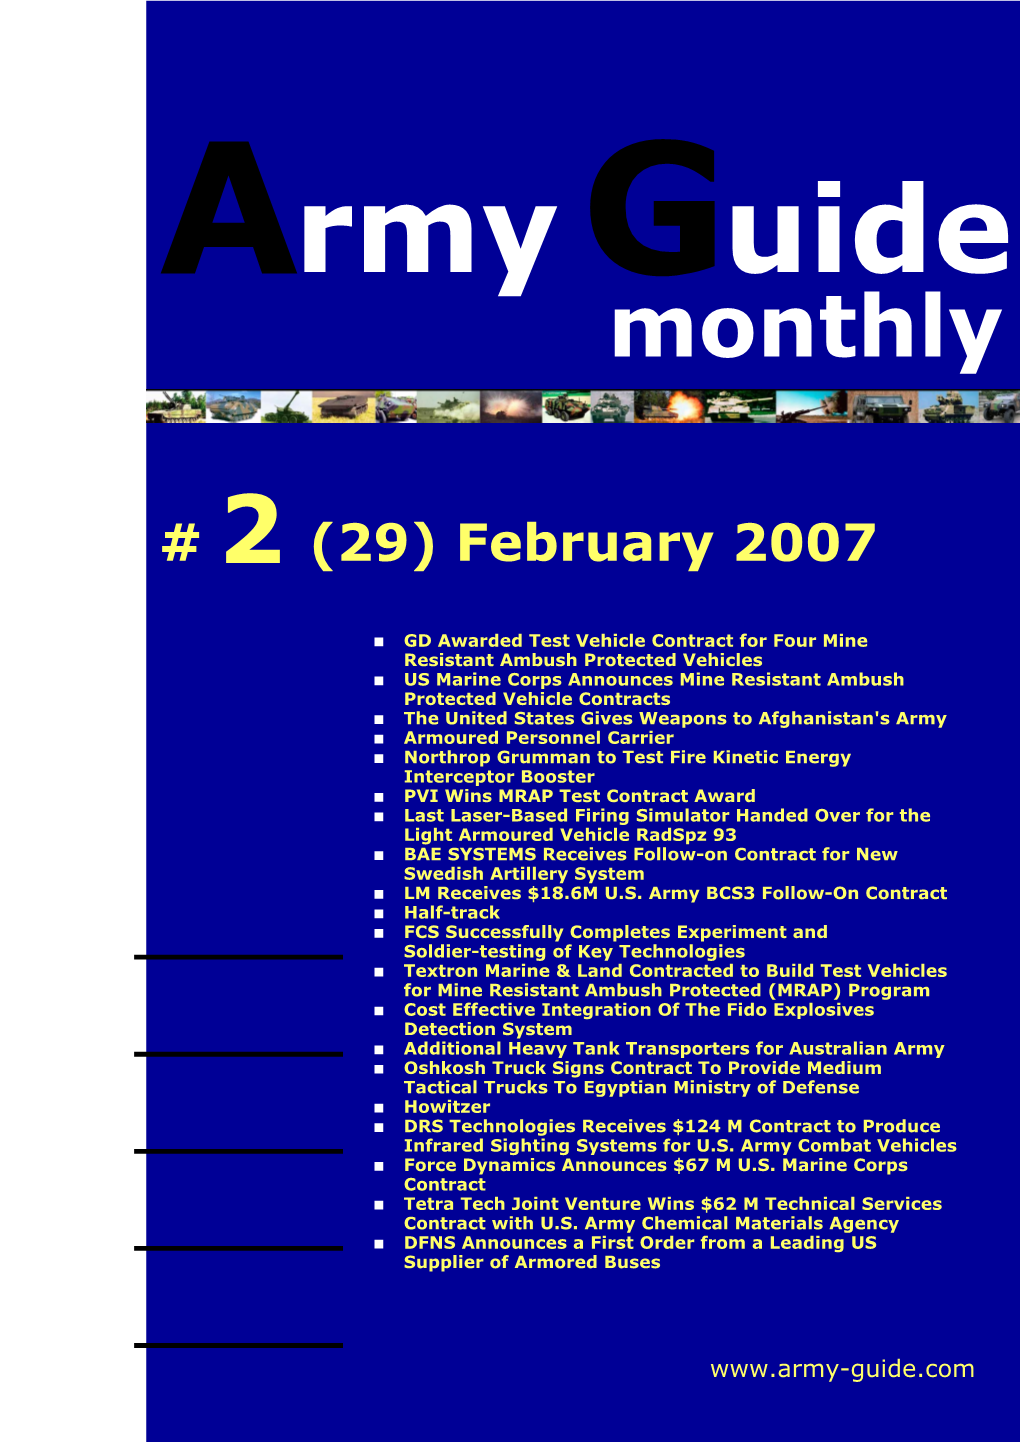 Army Guide Monthly • Issue #2 (29) • February 2007